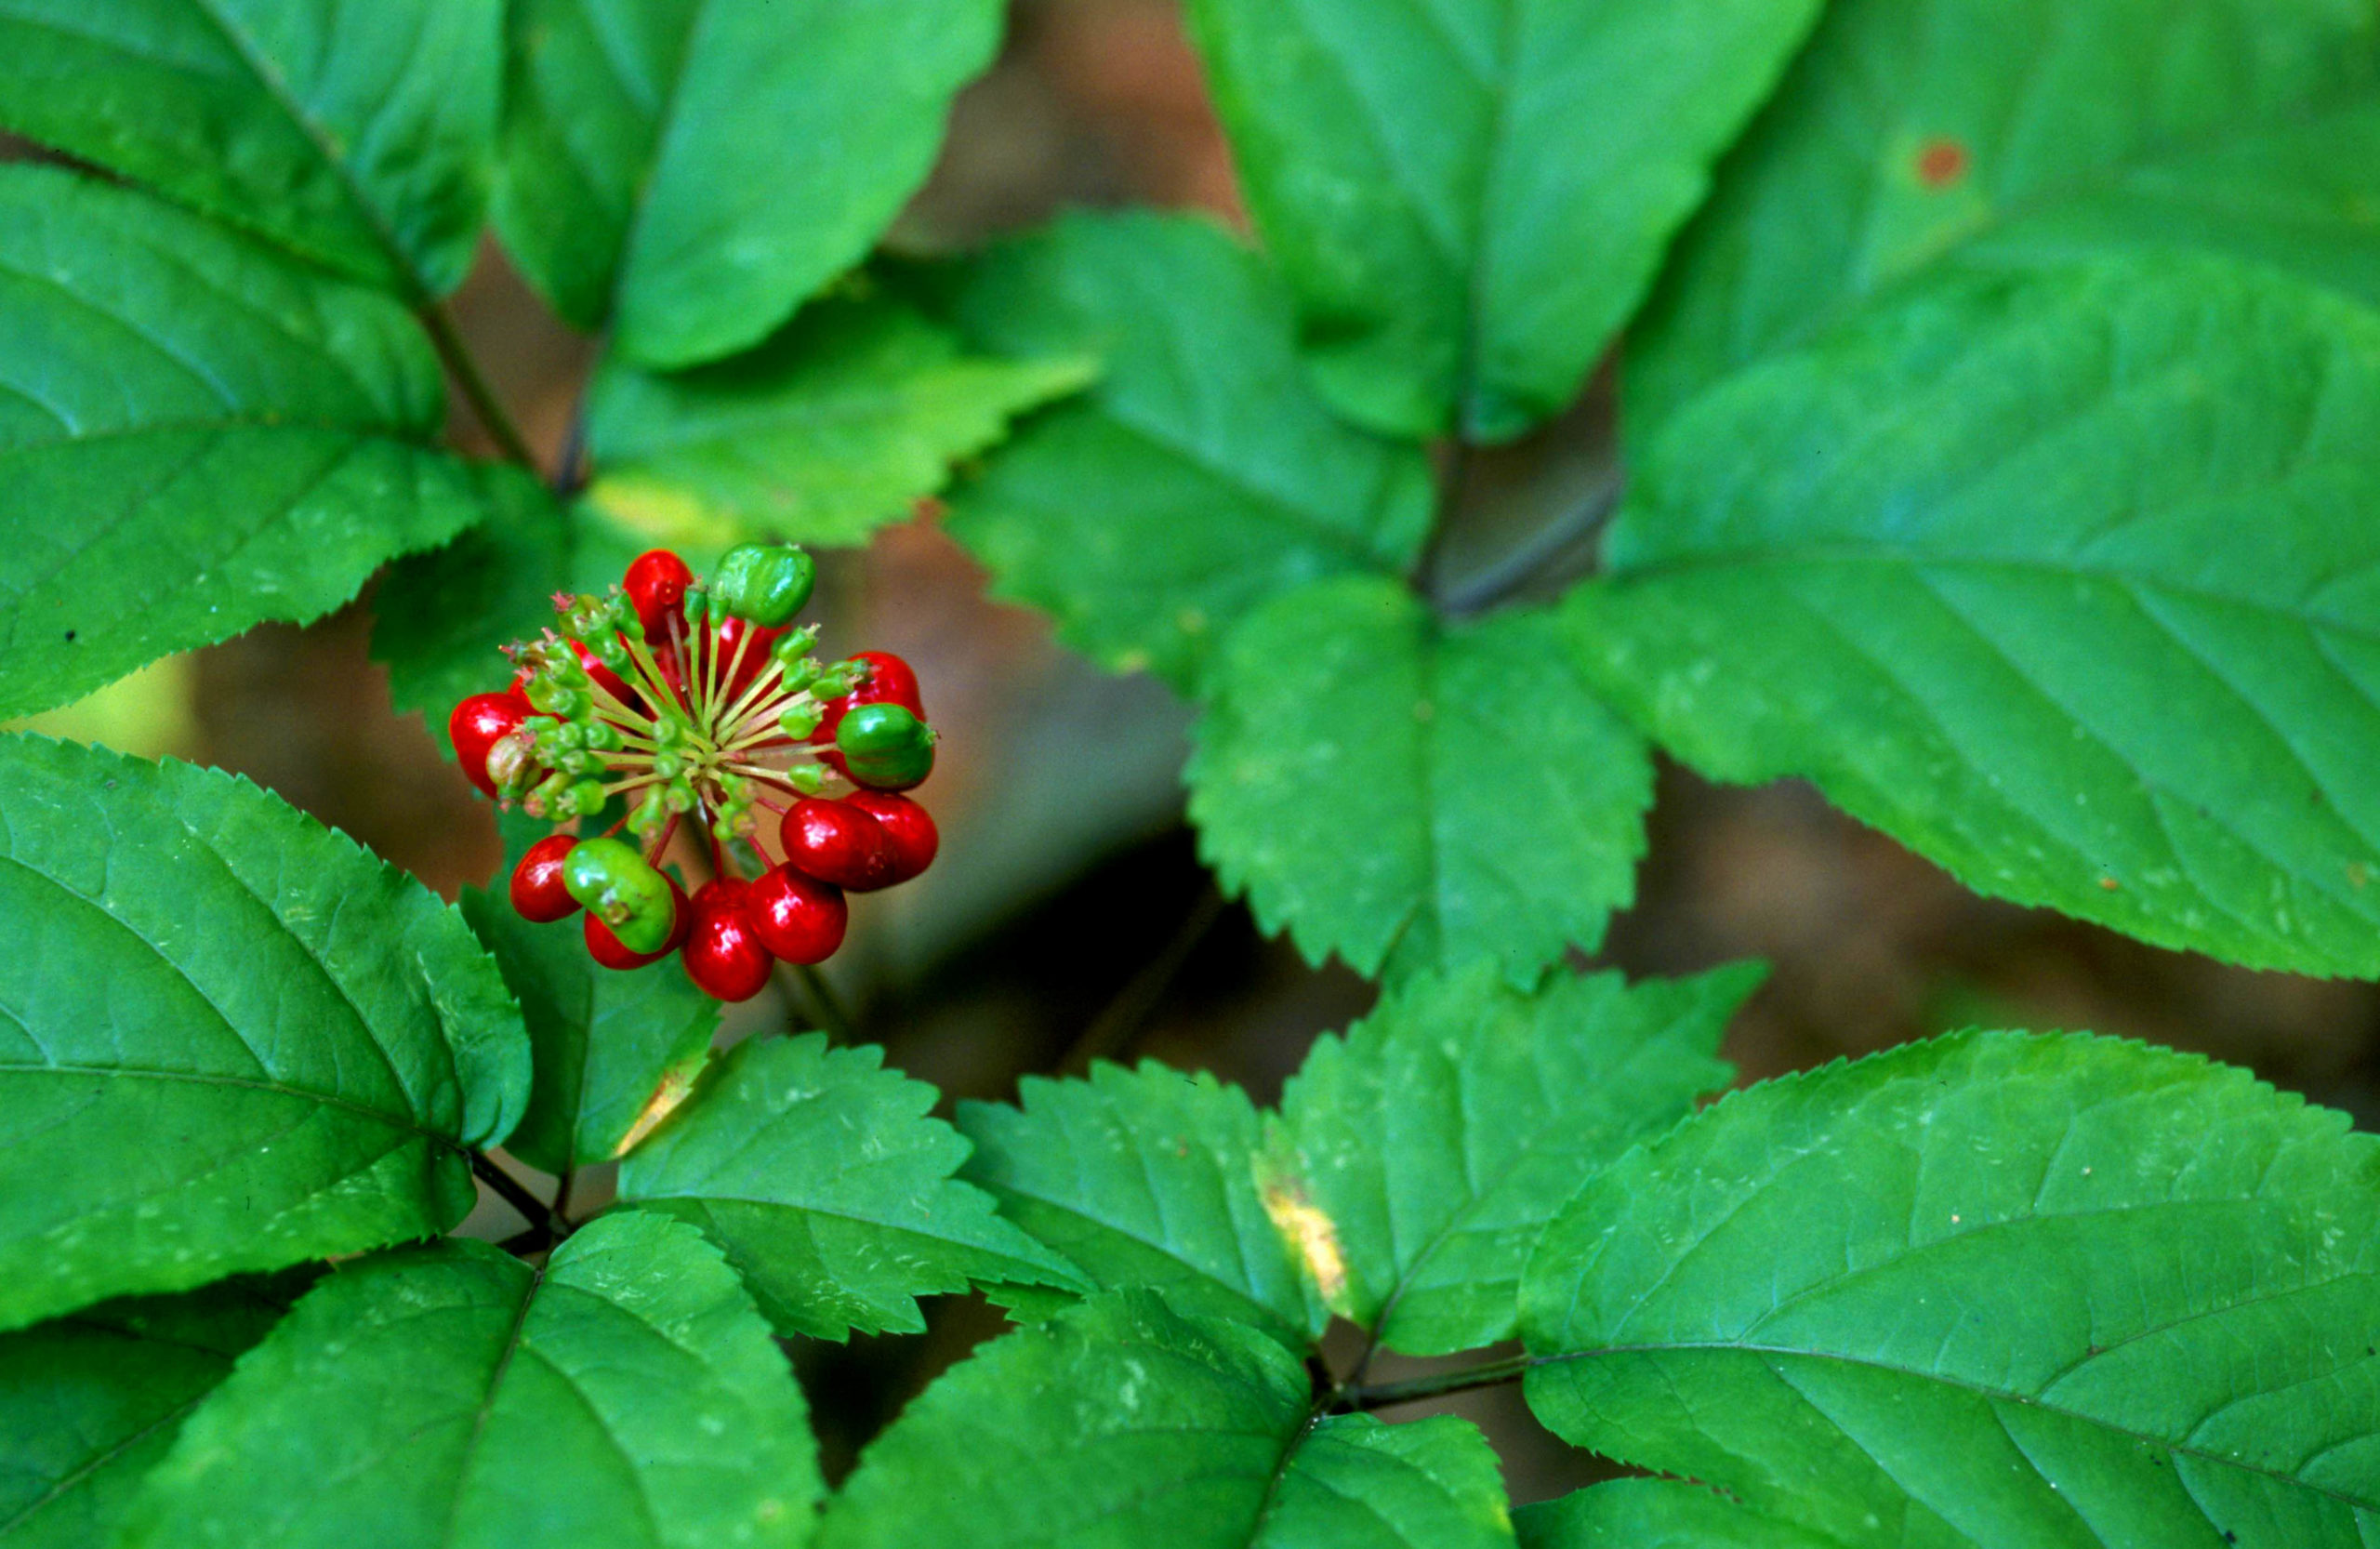 Ginseng defendant asks to plead guilty to misdemeanor